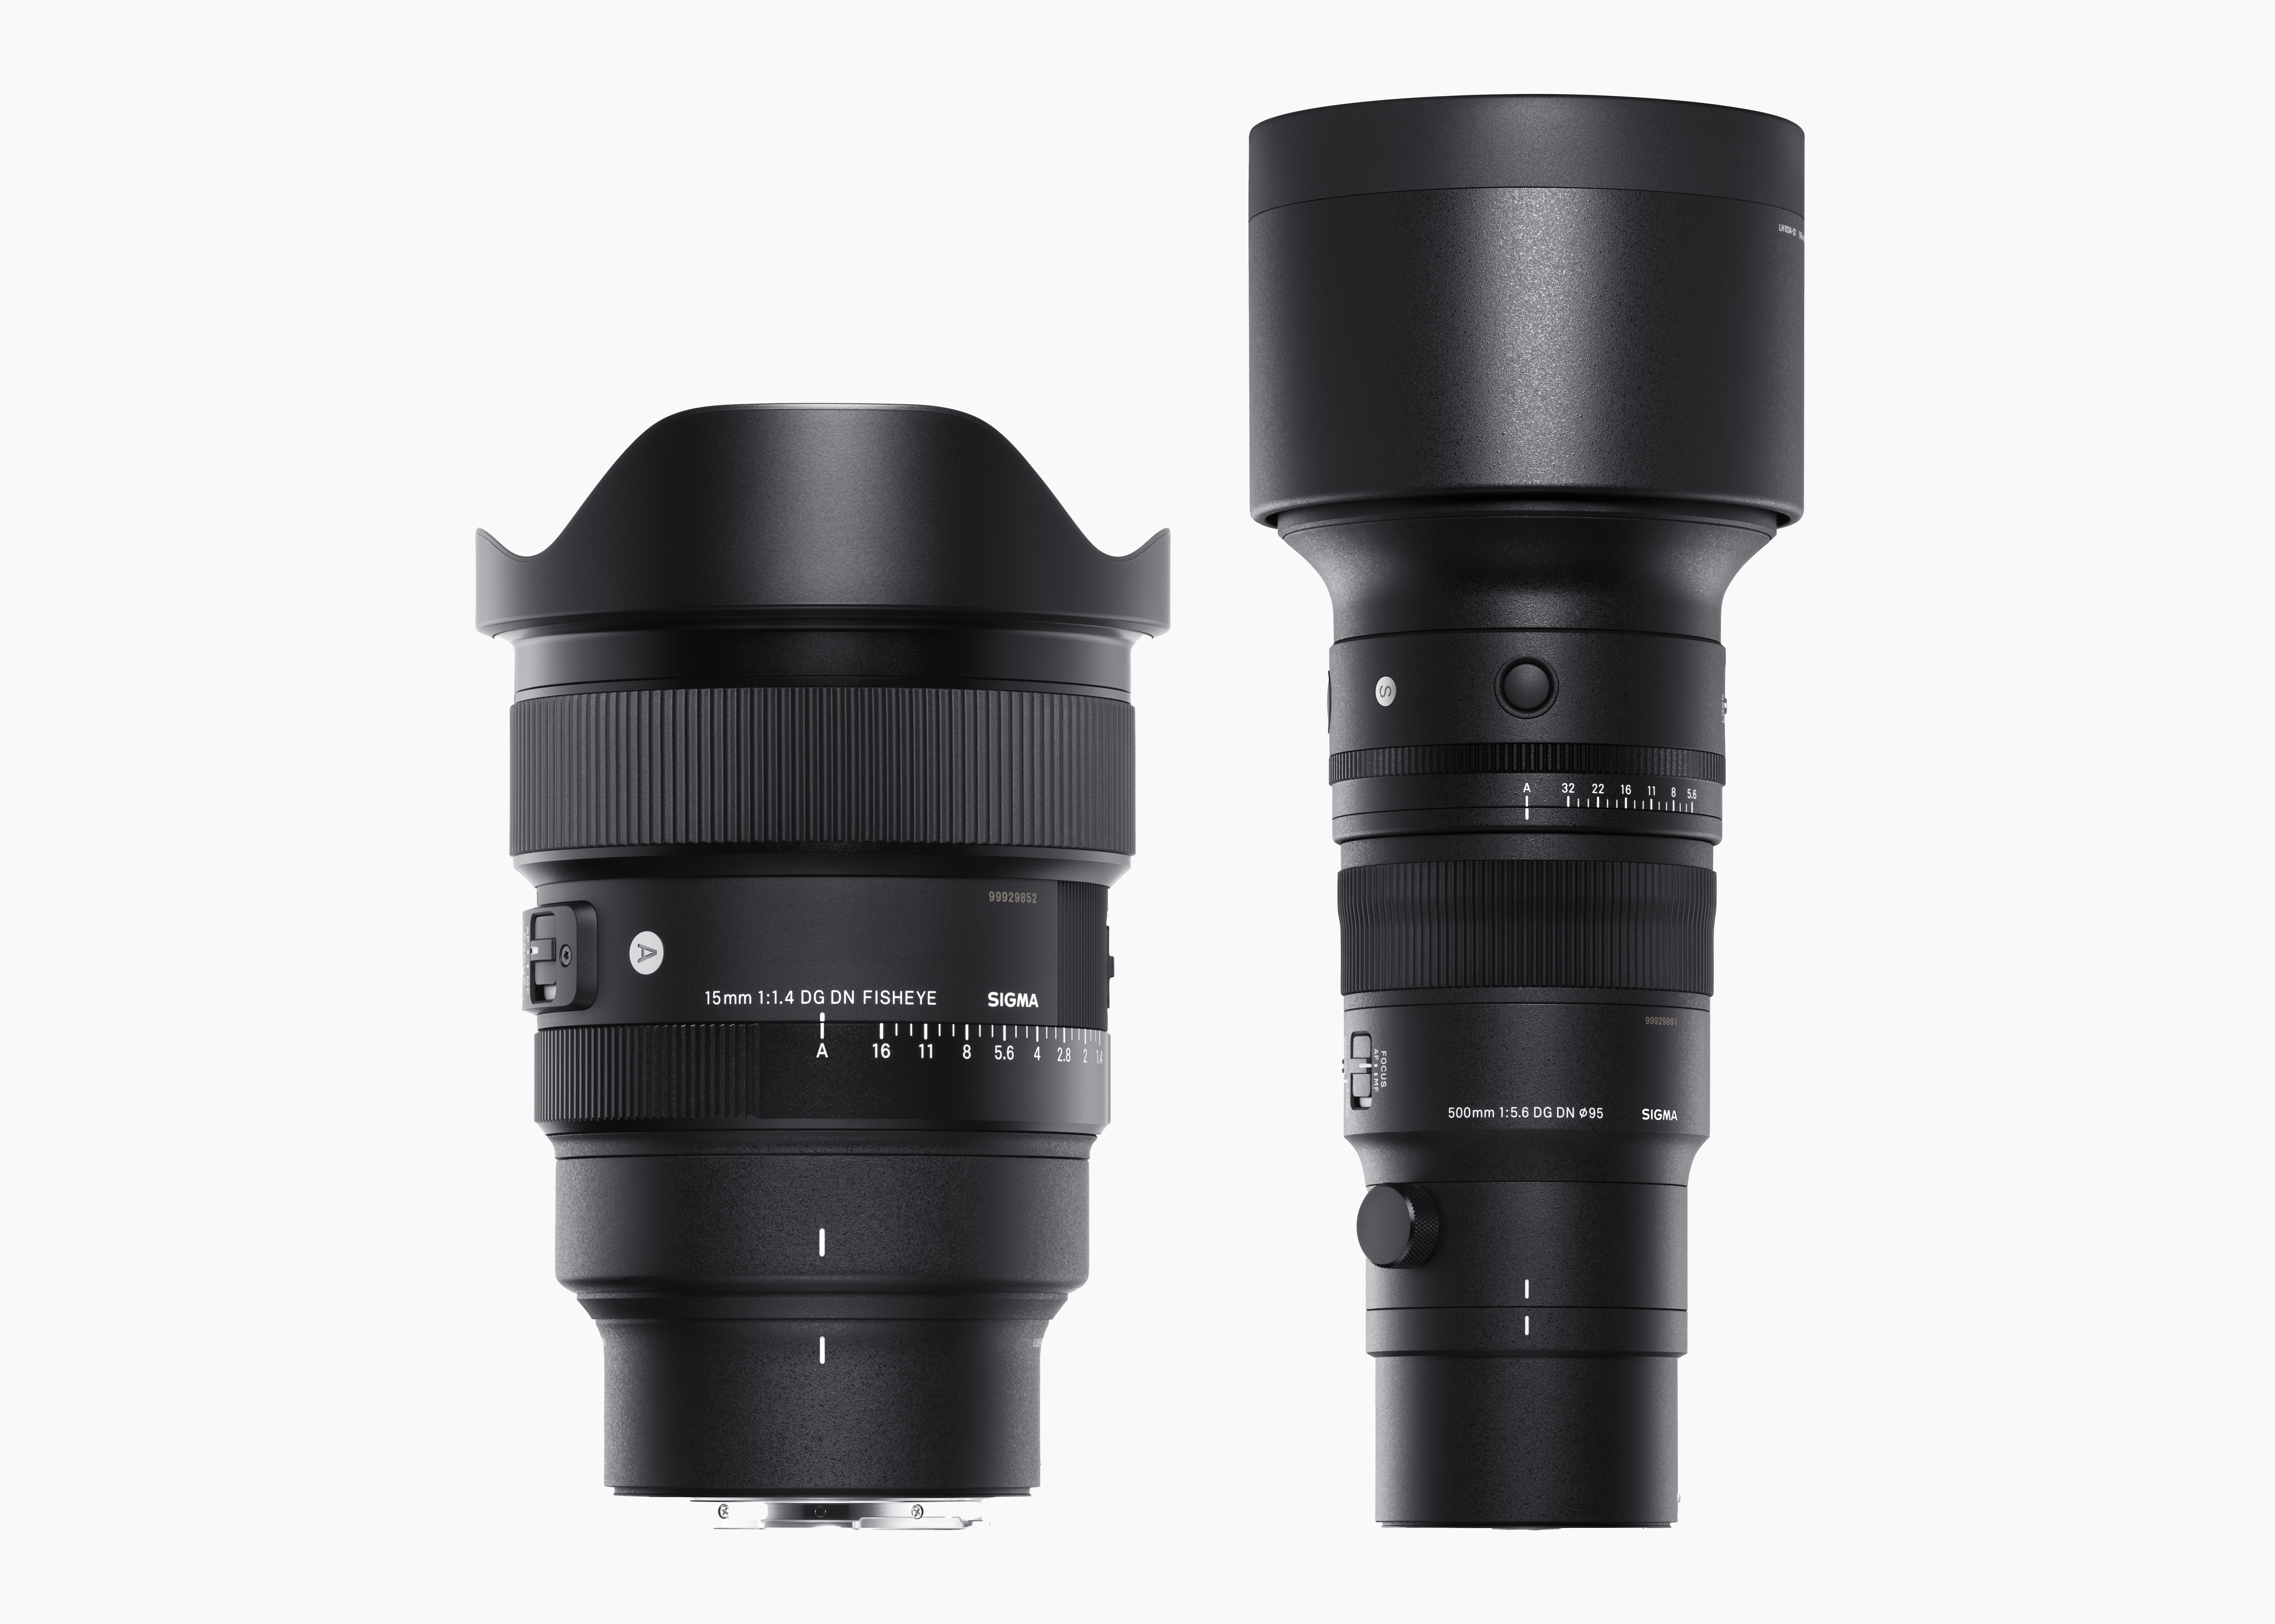 NEW SIGMA 15mm F1.4 DG DN and SIGMA 500mm F5.6 4